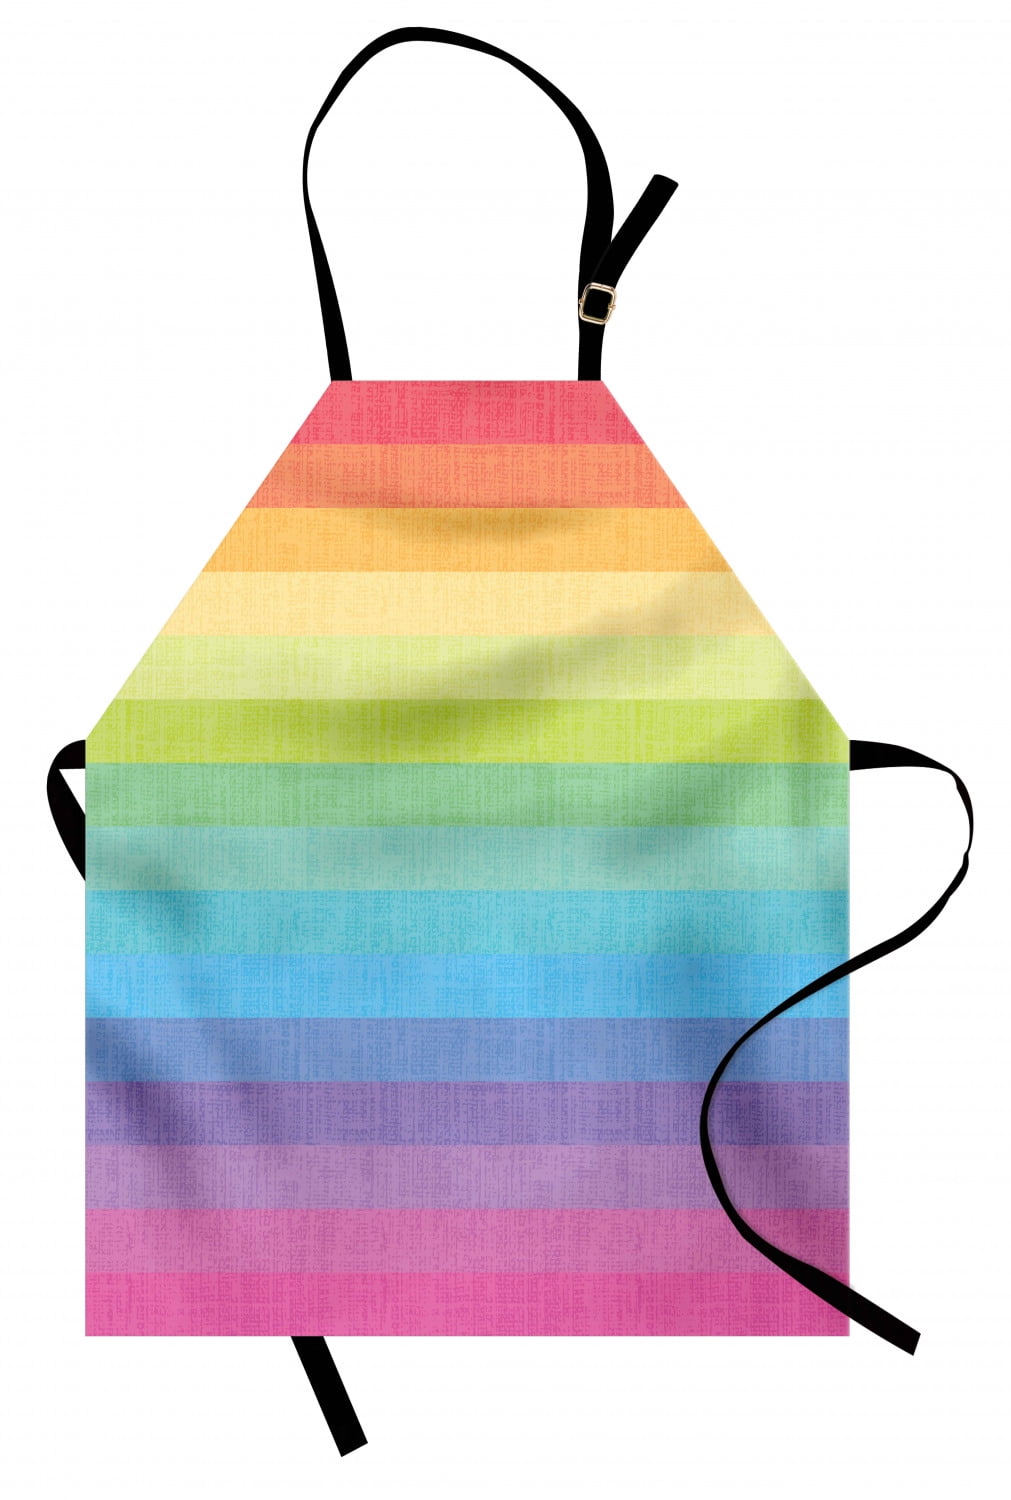 Lunarable Rainbow Apron Rainbow Colored Half Circles Getting Bigger and Bigger Perspective Computer Graphic Multicolor Unisex Kitchen Bib Apron with Adjustable Neck for Cooking Baking Gardening